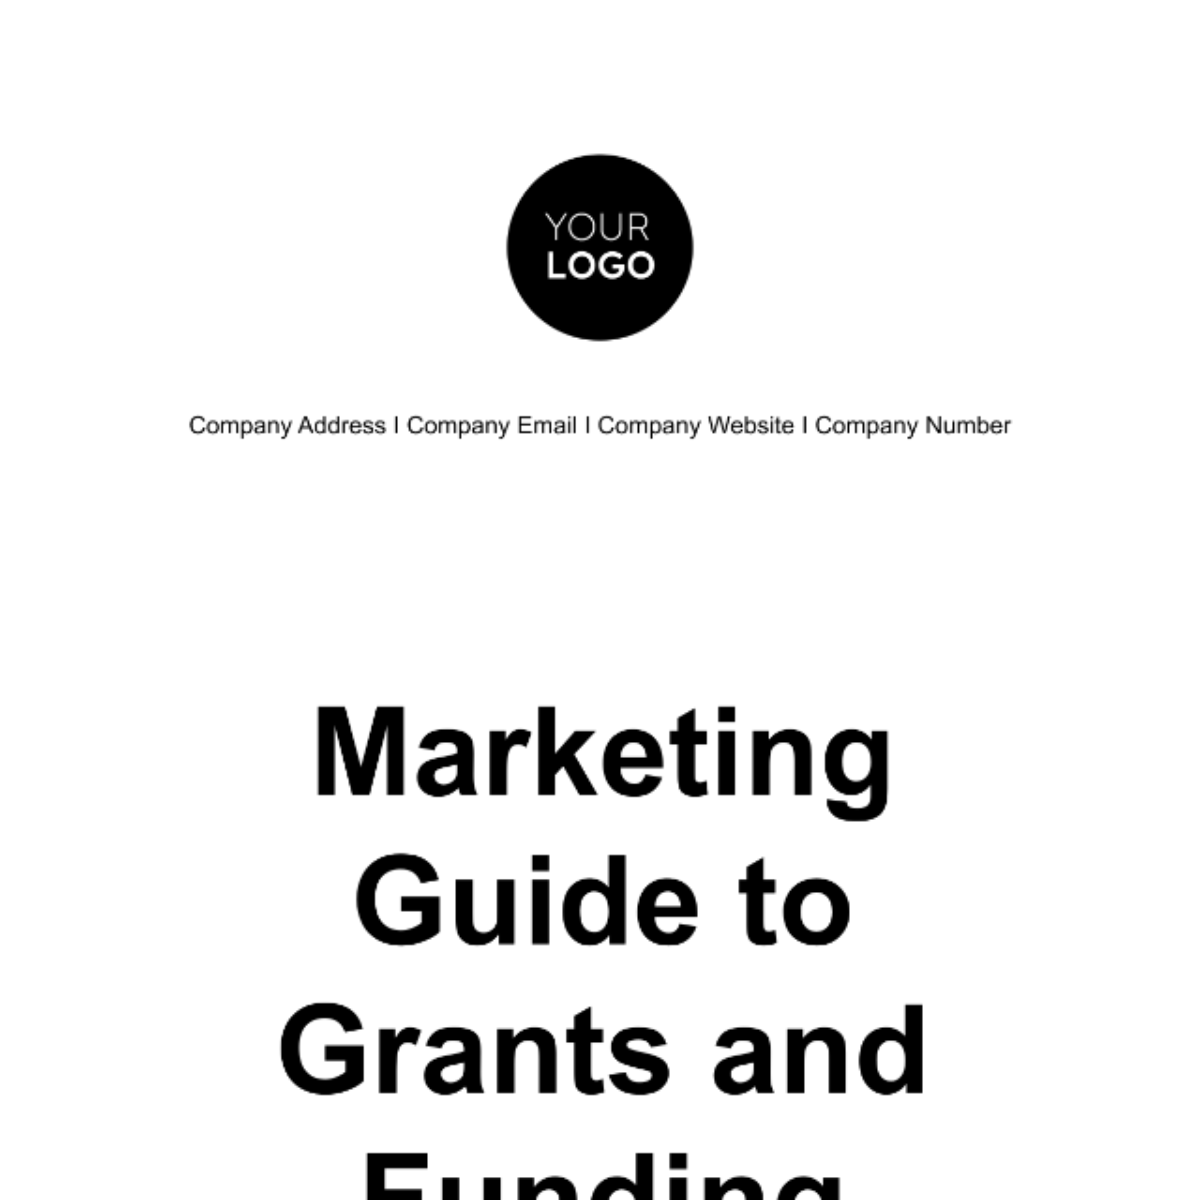 Marketing Guide to Grants and Funding Template